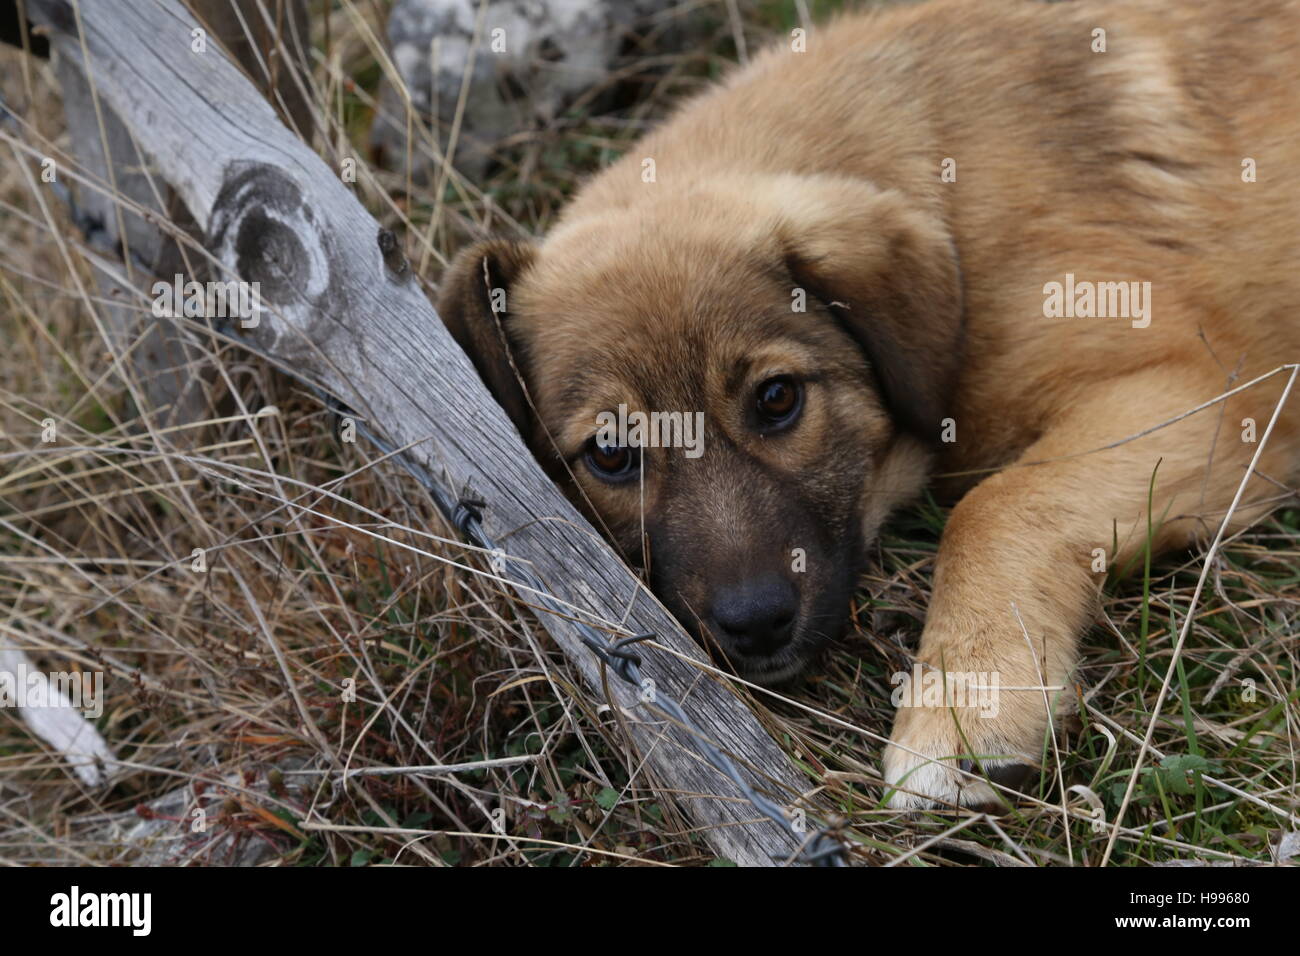 A stray puppy laying on a grass. Stock Photo